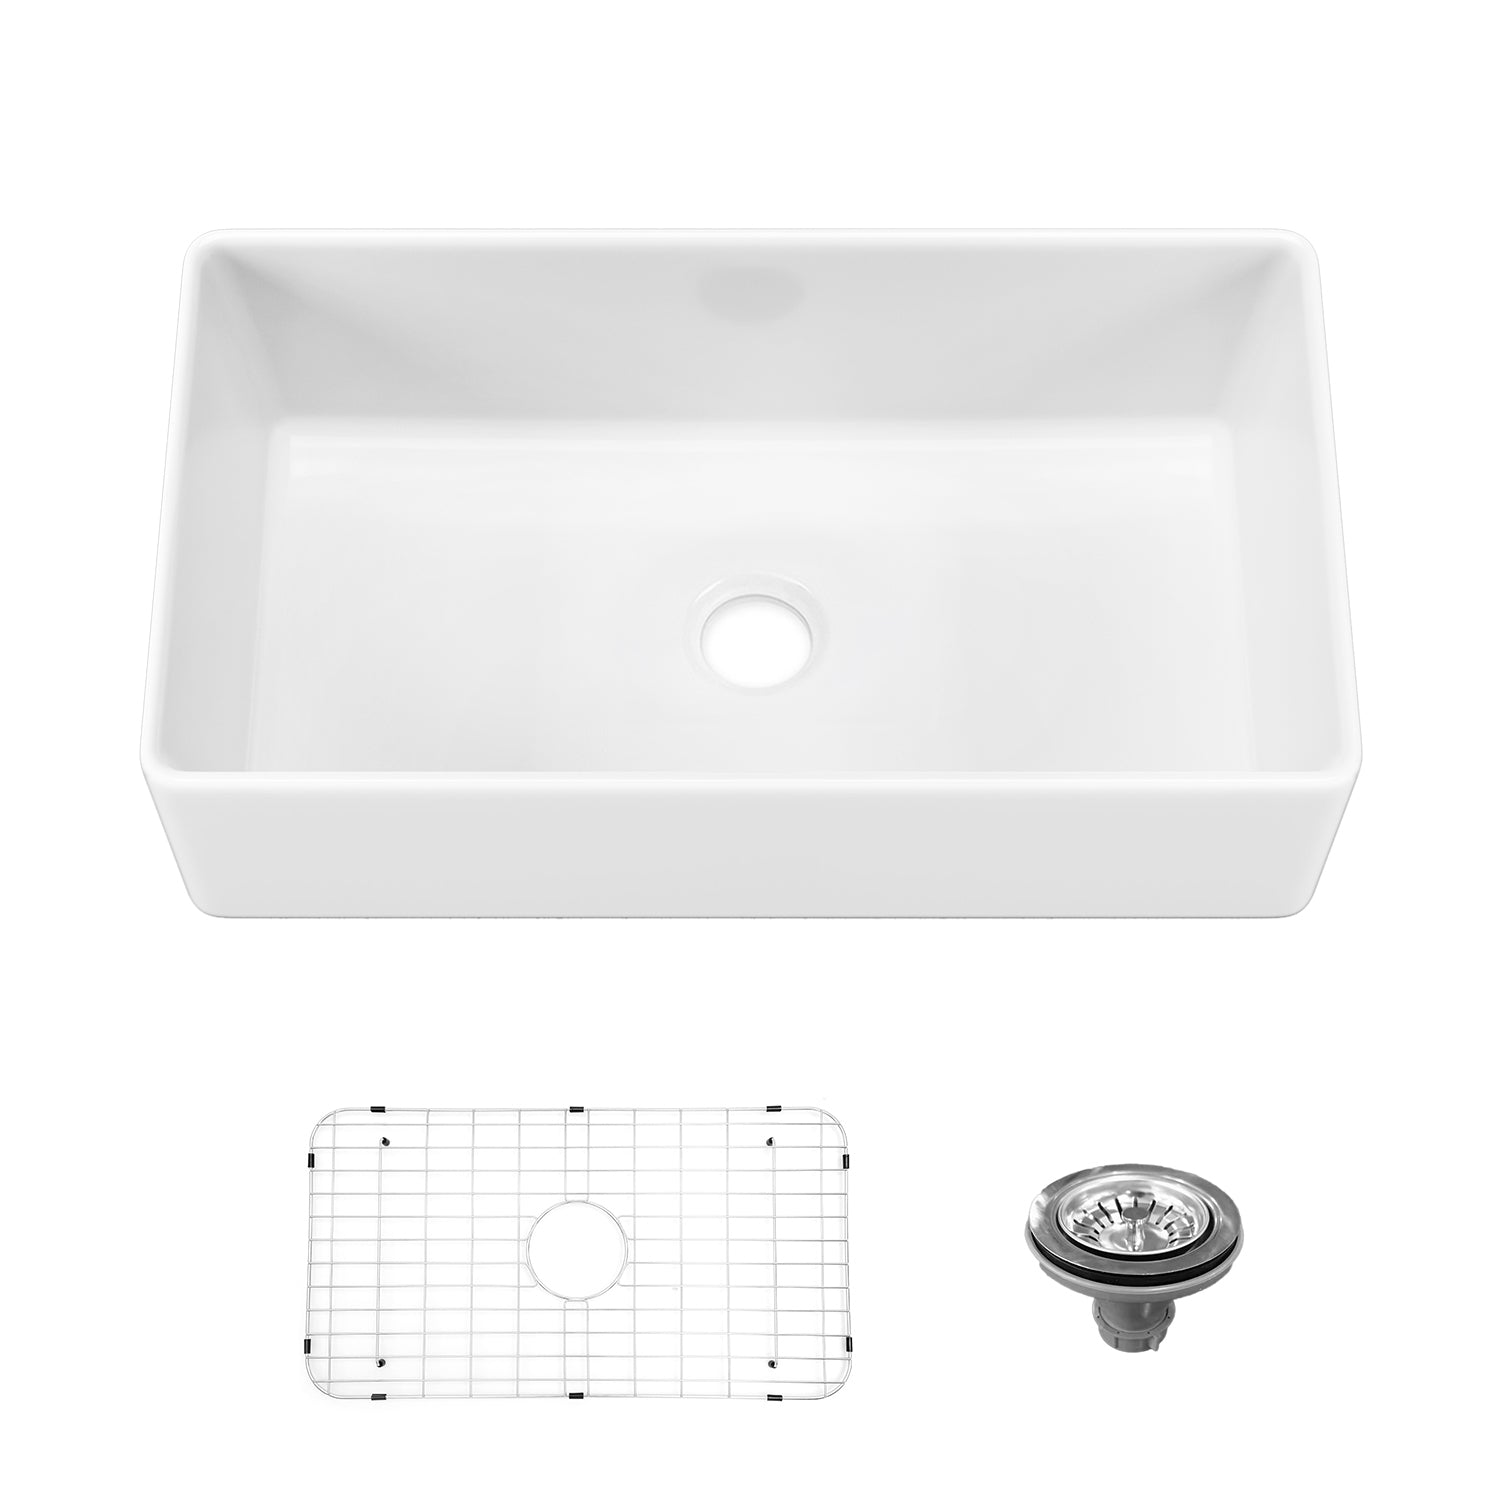 Sinber 36 Inch Farmhouse Apron Single Bowl Kitchen Sink with Fireclay White Finish 2 Accessories F3620S-OL